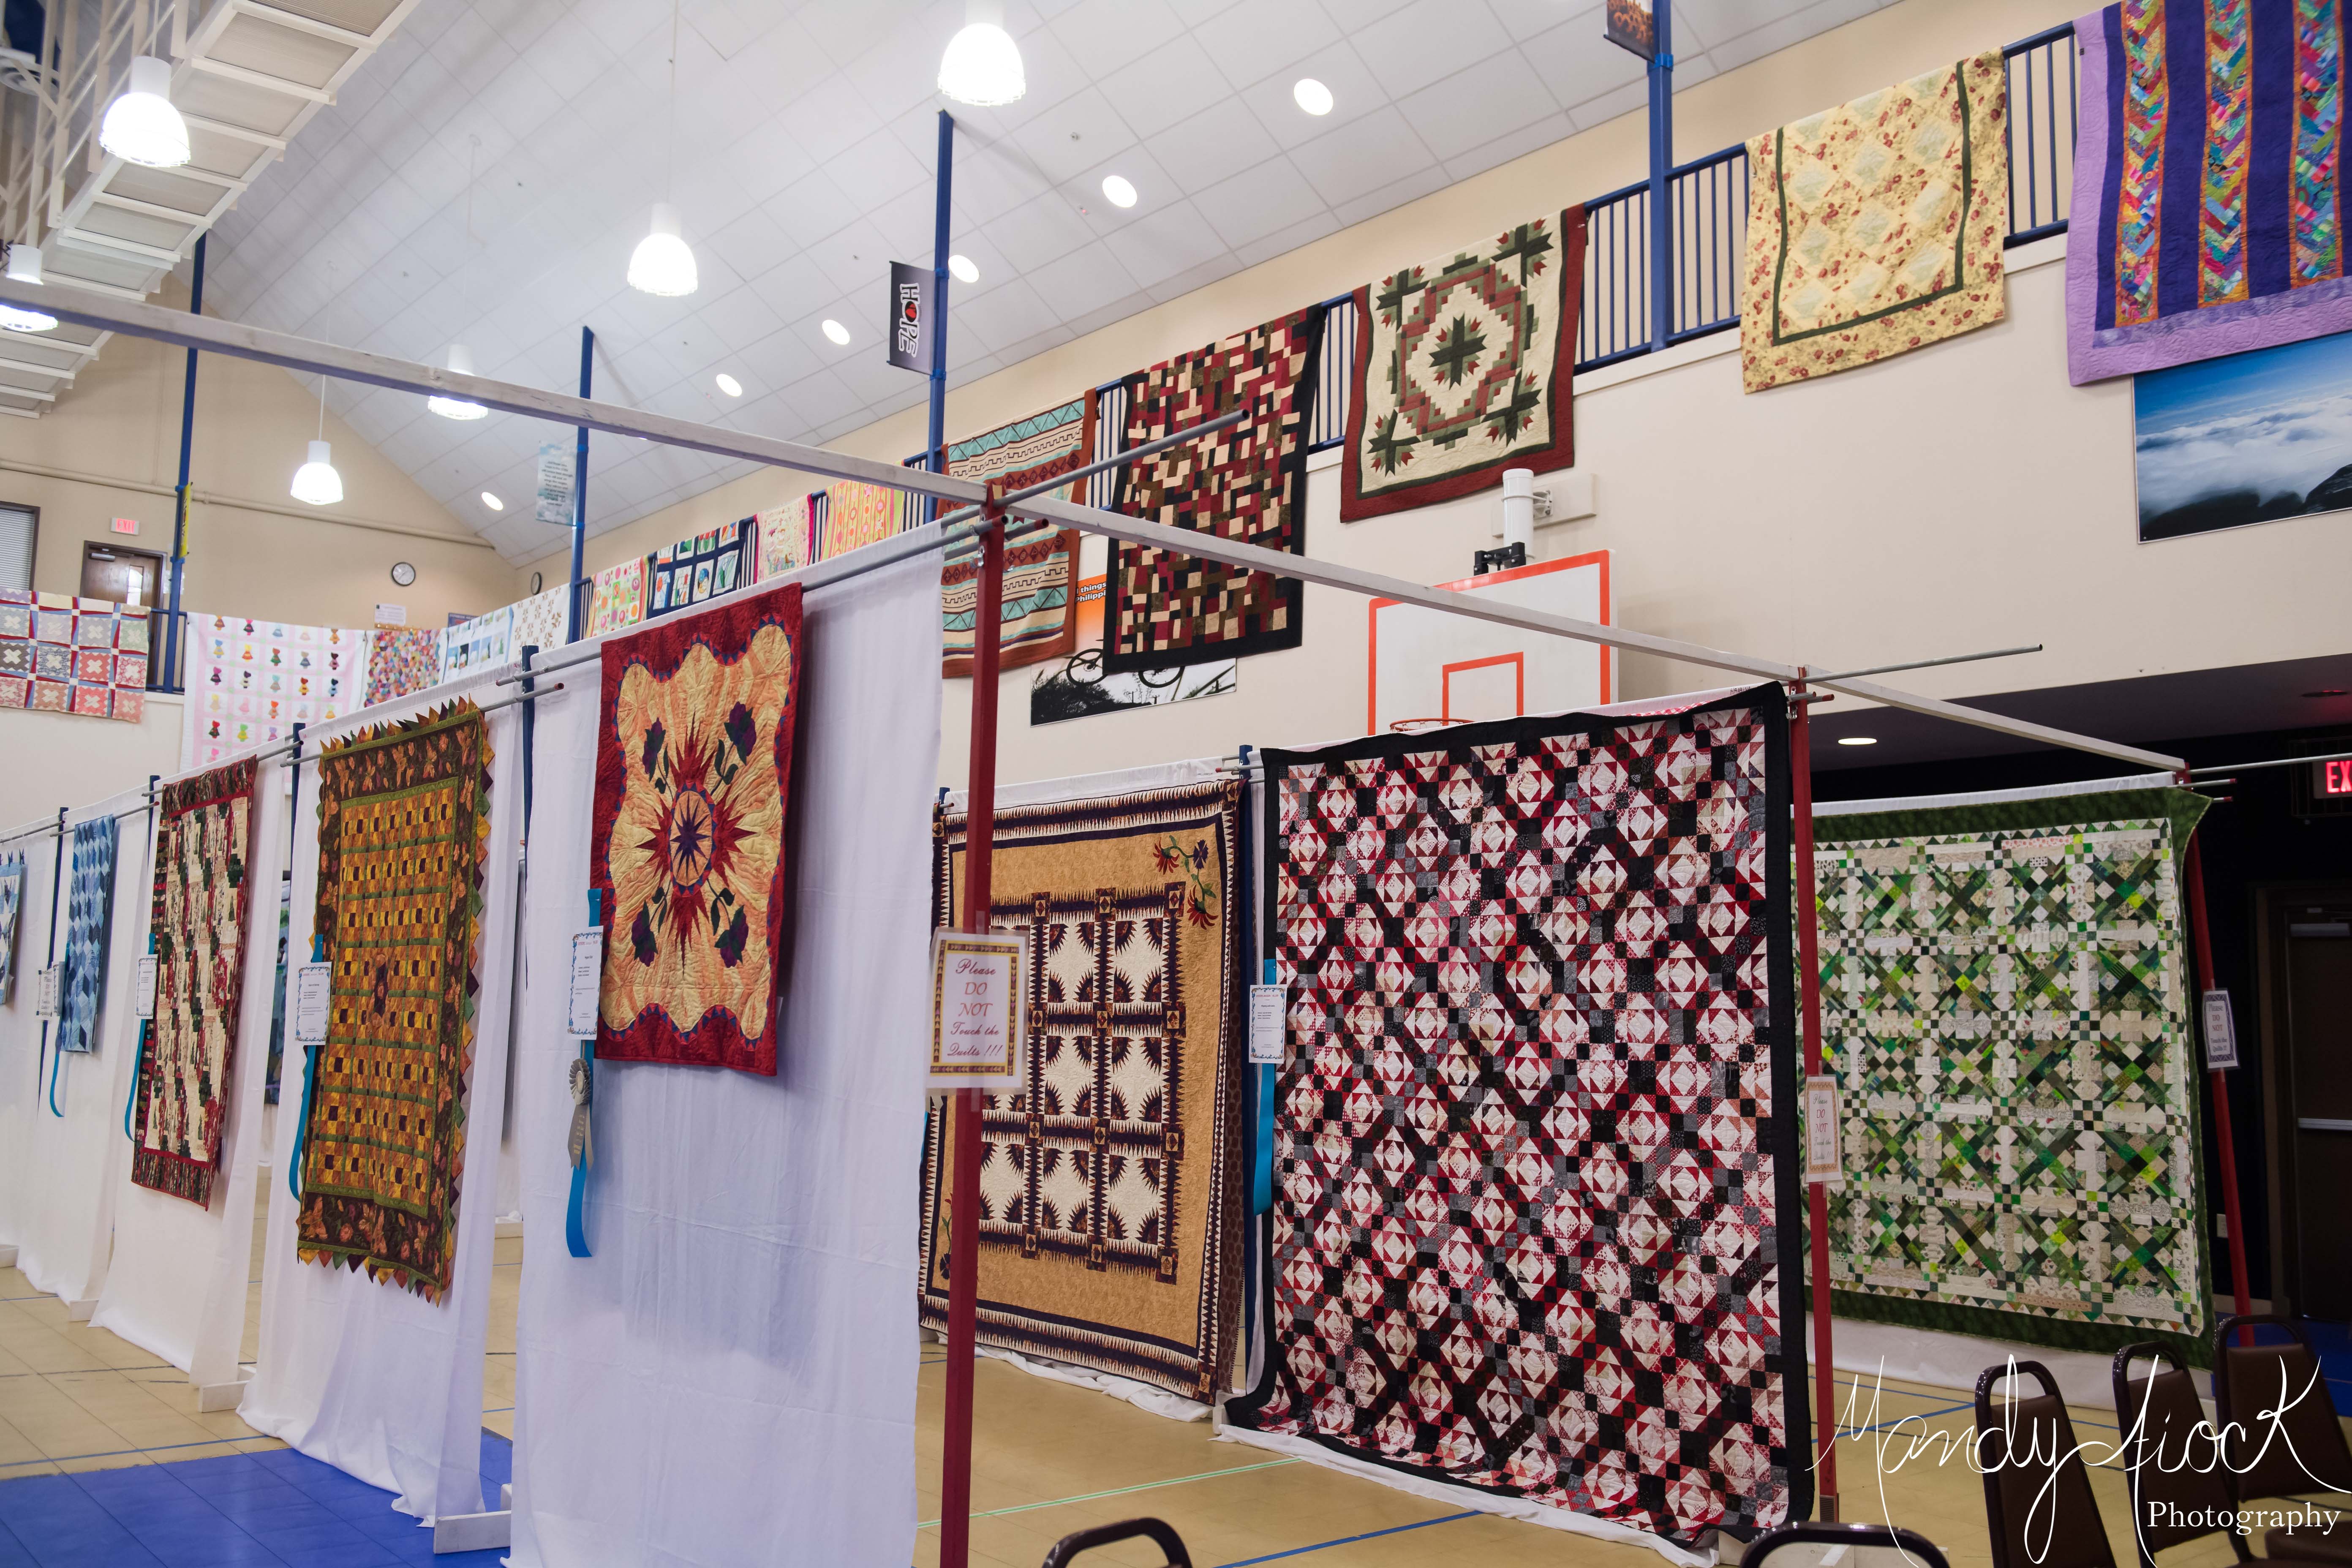 Photos from the 2018 Lone Star Heritage Quilt Guild’s Annual Quilt Show by Mandy Fiock Photography!